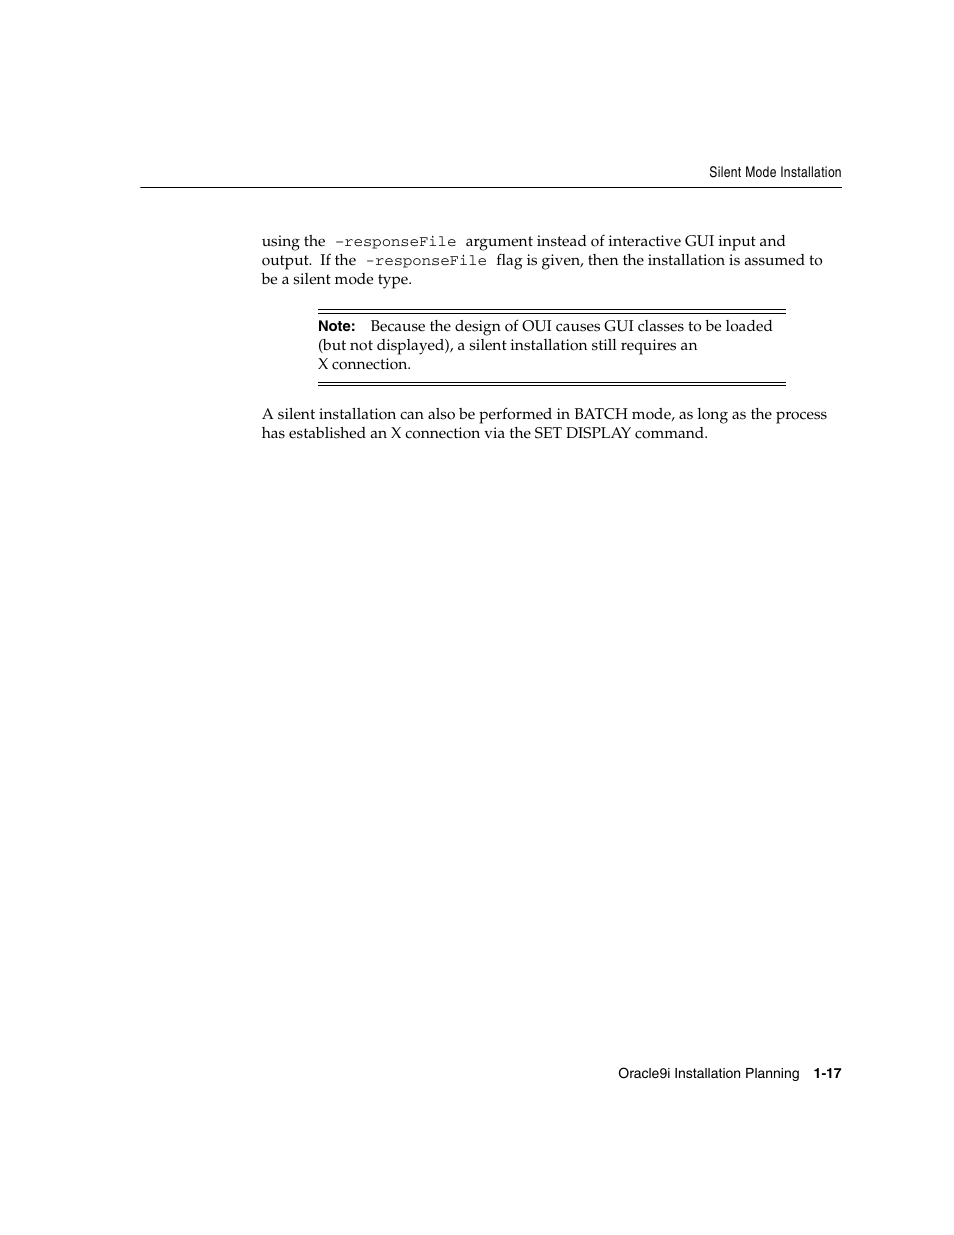 Oracle Audio Technologies ORACLE9I B10508-01 User Manual | Page 33 / 186